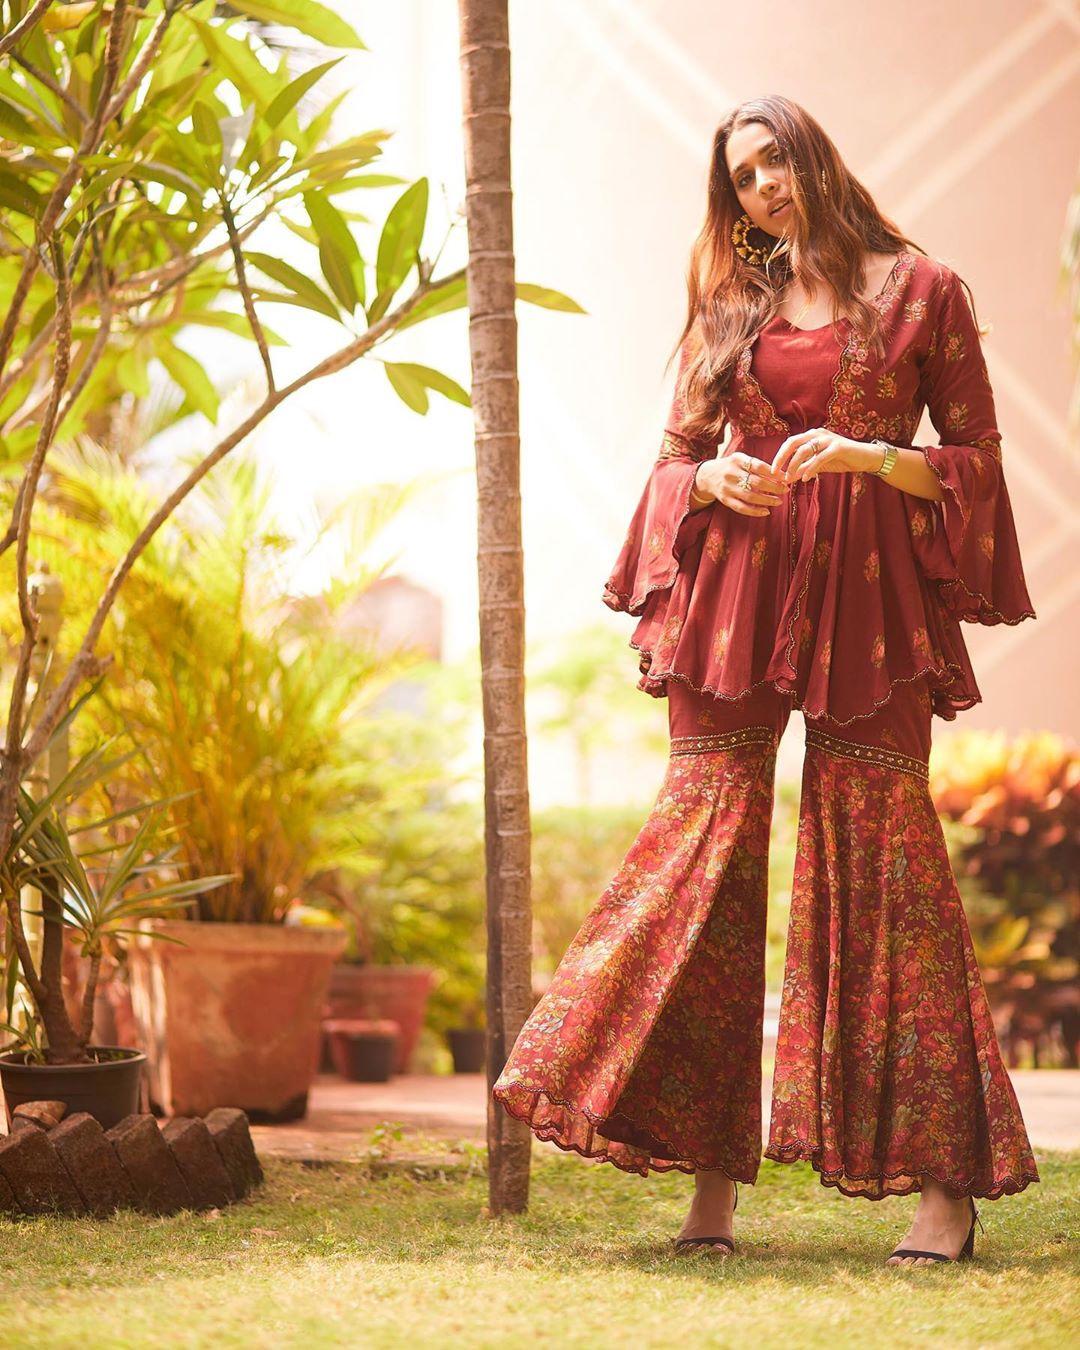 These Ethnic Co-ord Sets Can Up Your Fashion Game at Weddings